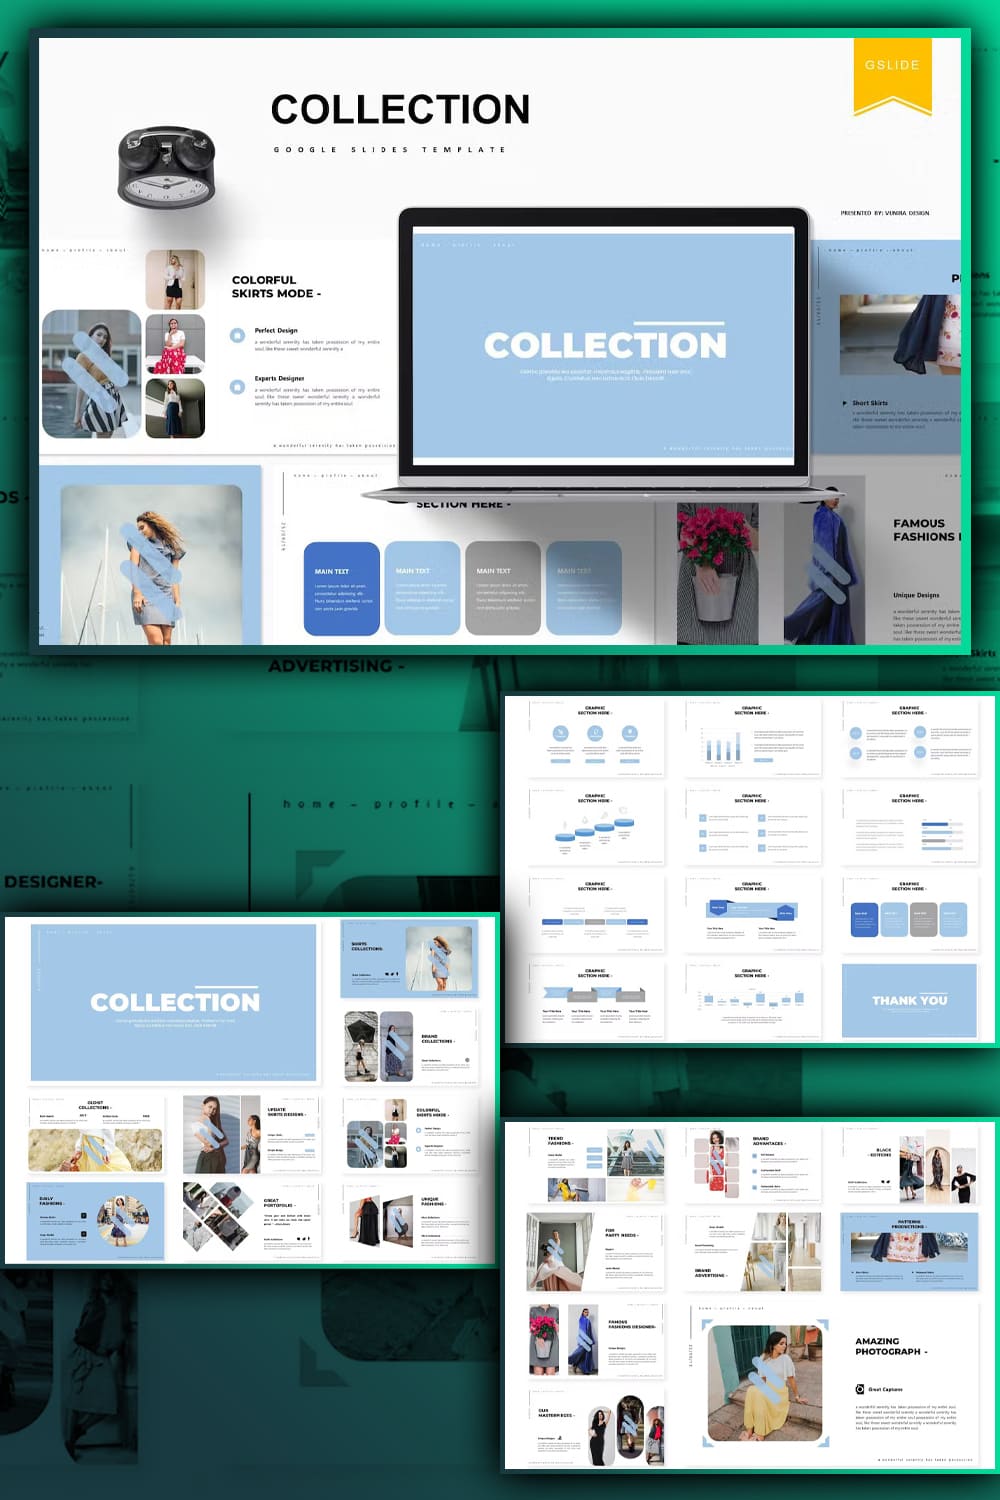 Slide about colorful skirts mode of Collection Google slides template.